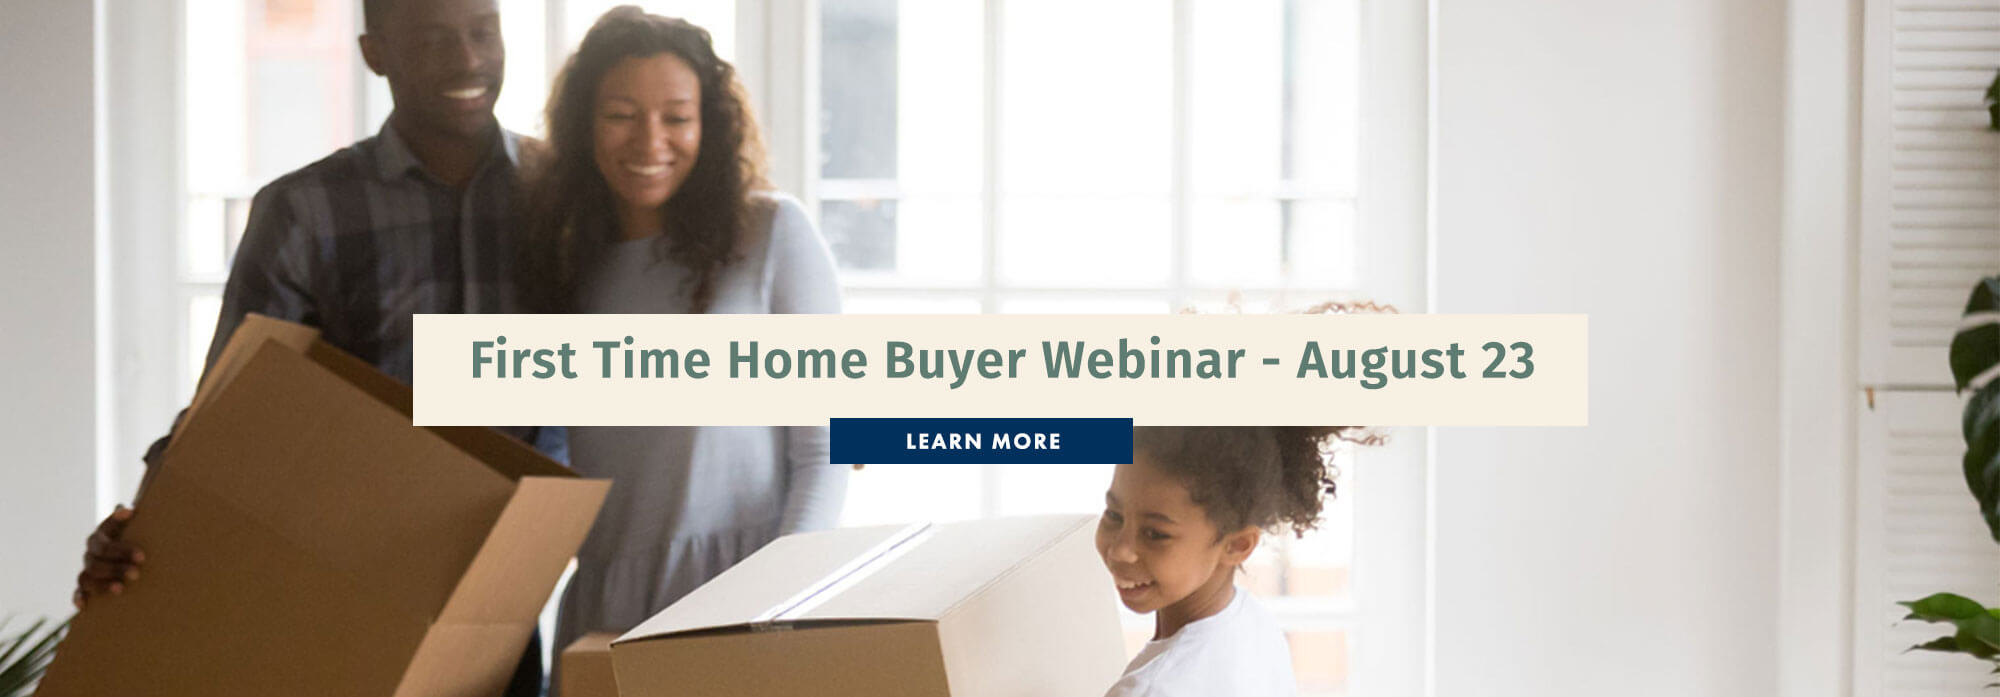 First Time Home Buyer Webinar - August 23